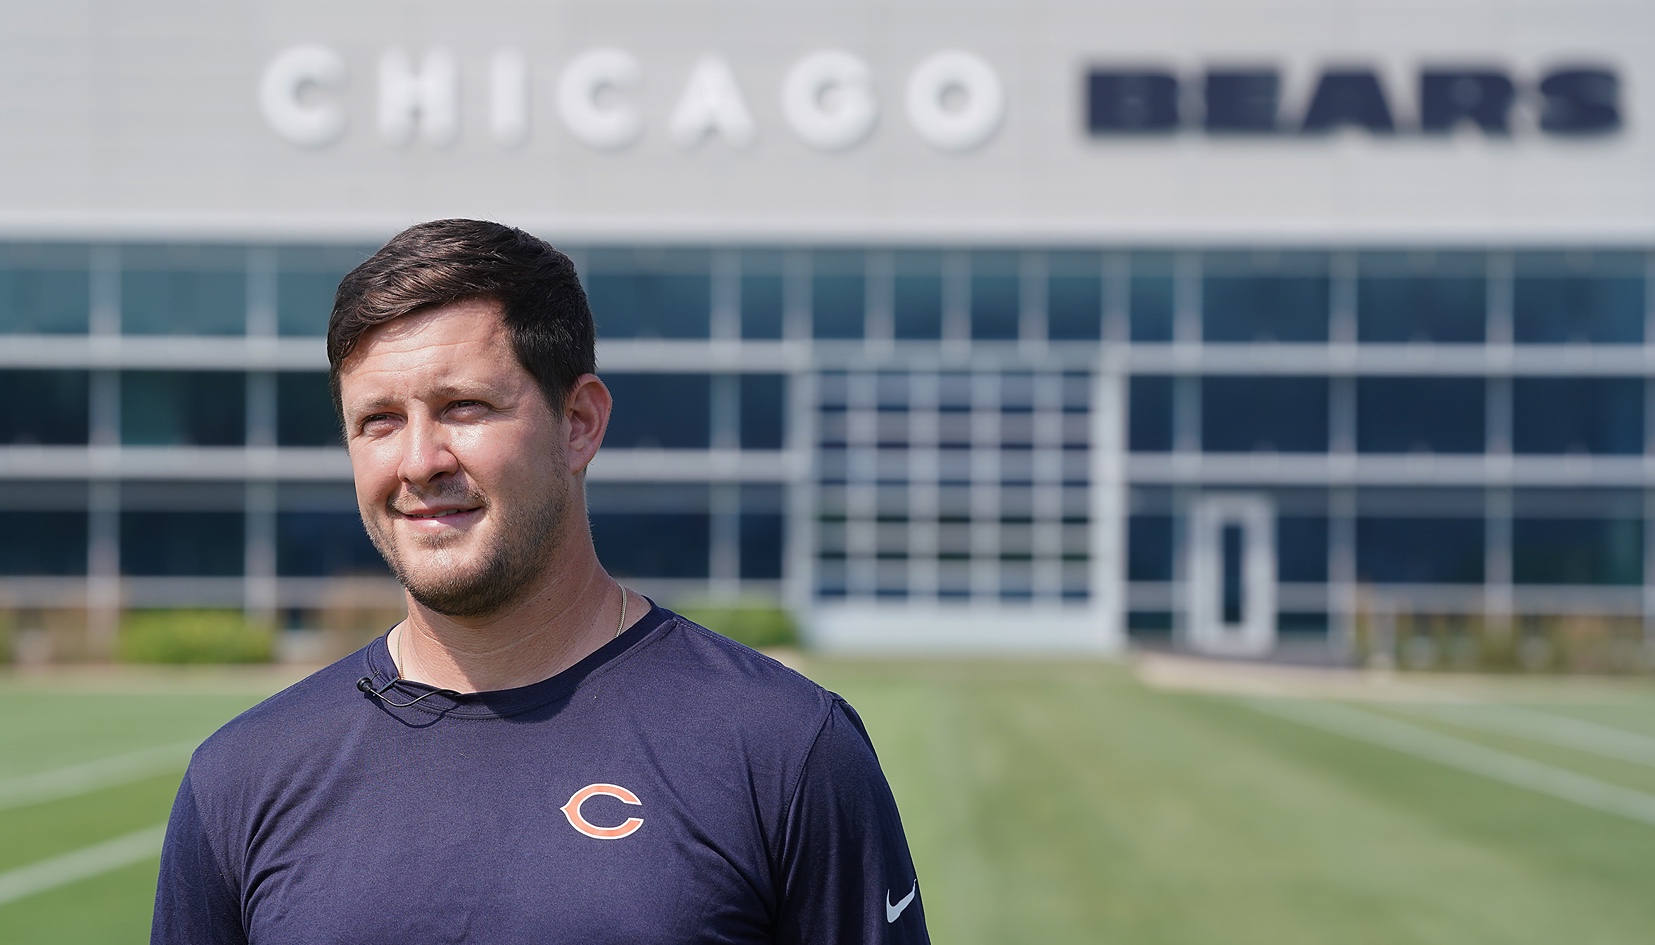 Football at Chicago Bears Headquarters